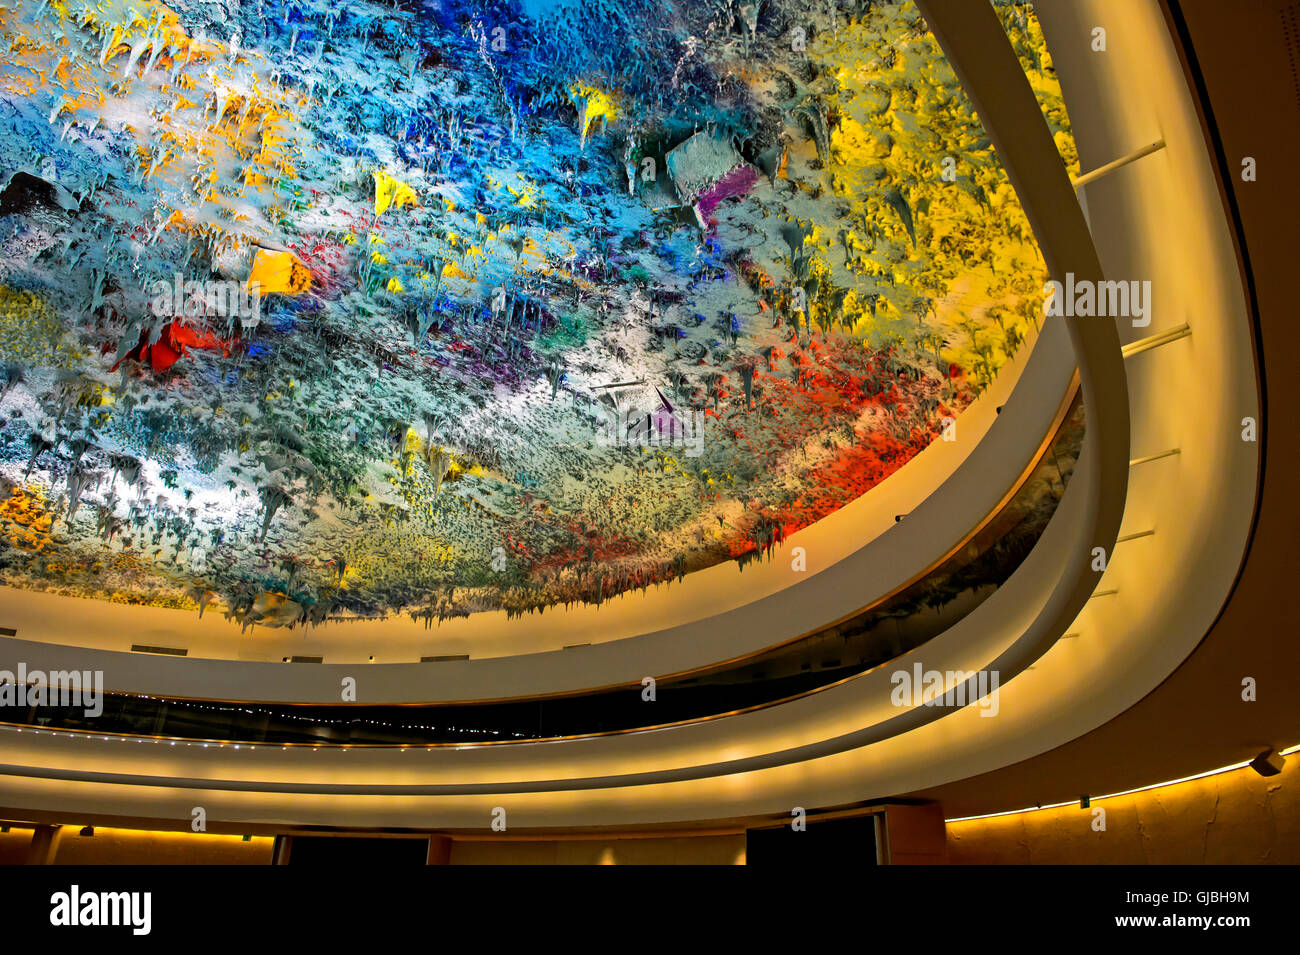 Ceiling sculpture in the Human Rights and Alliance of Civilization Chamber, Palais des Nations, Geneva, Switzerland Stock Photo